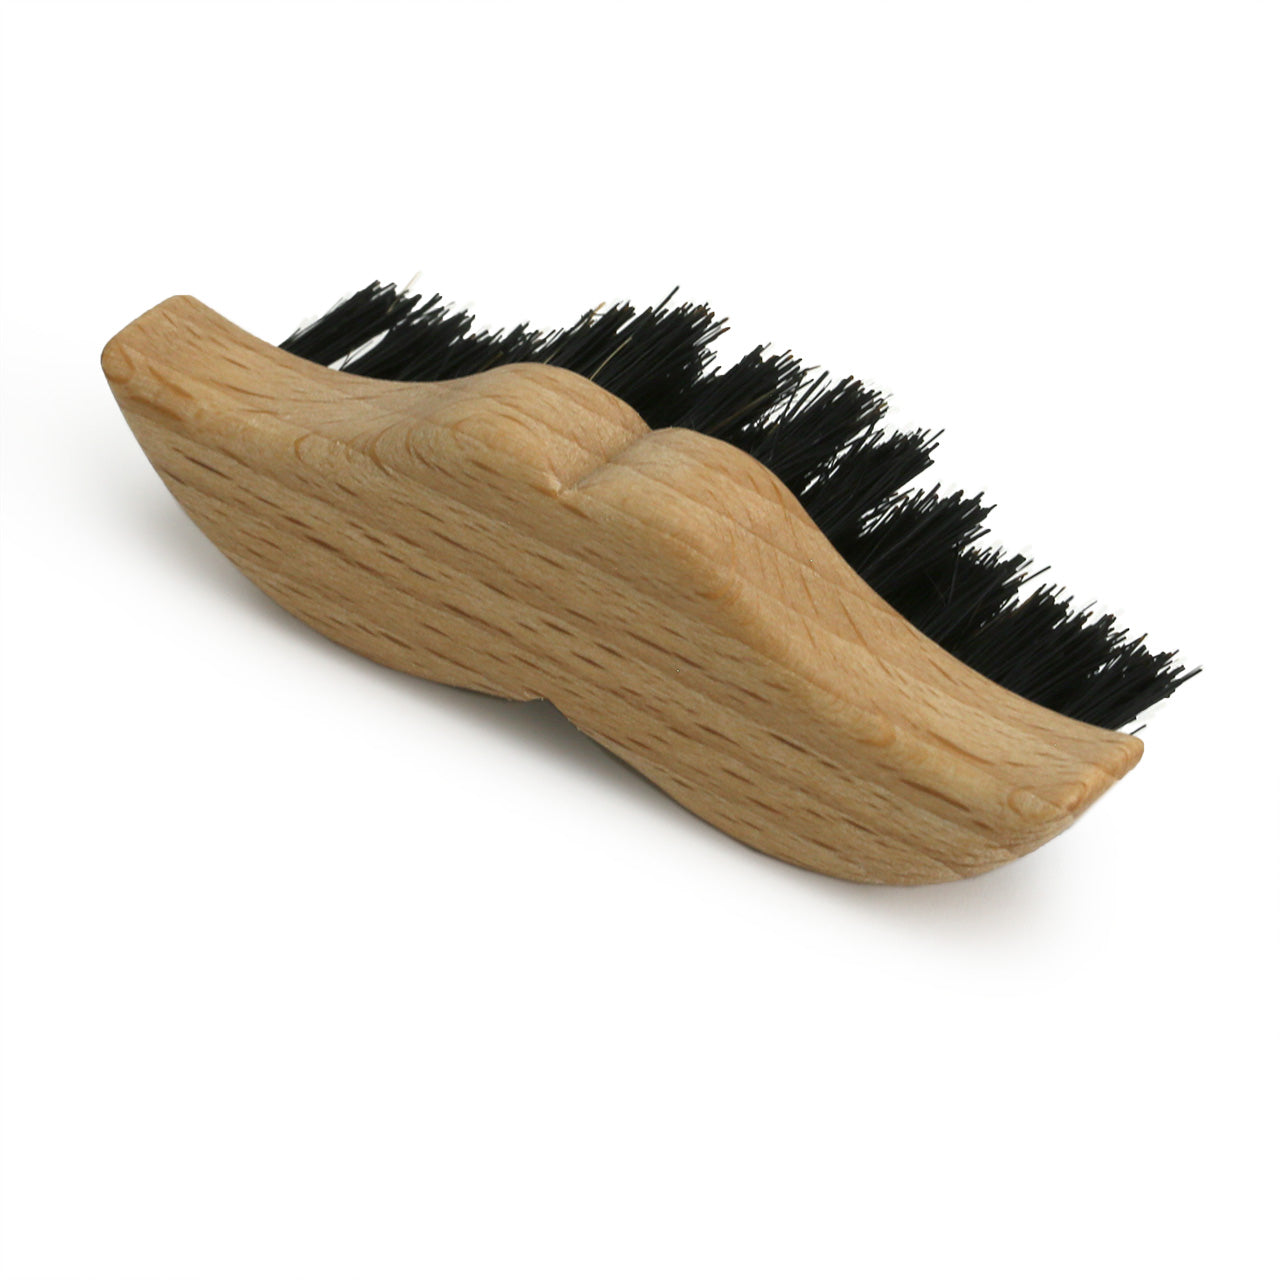 Redecker moustache brush - in the shape of a moustache - from germany . with a natural coloured timber and stiff bristles